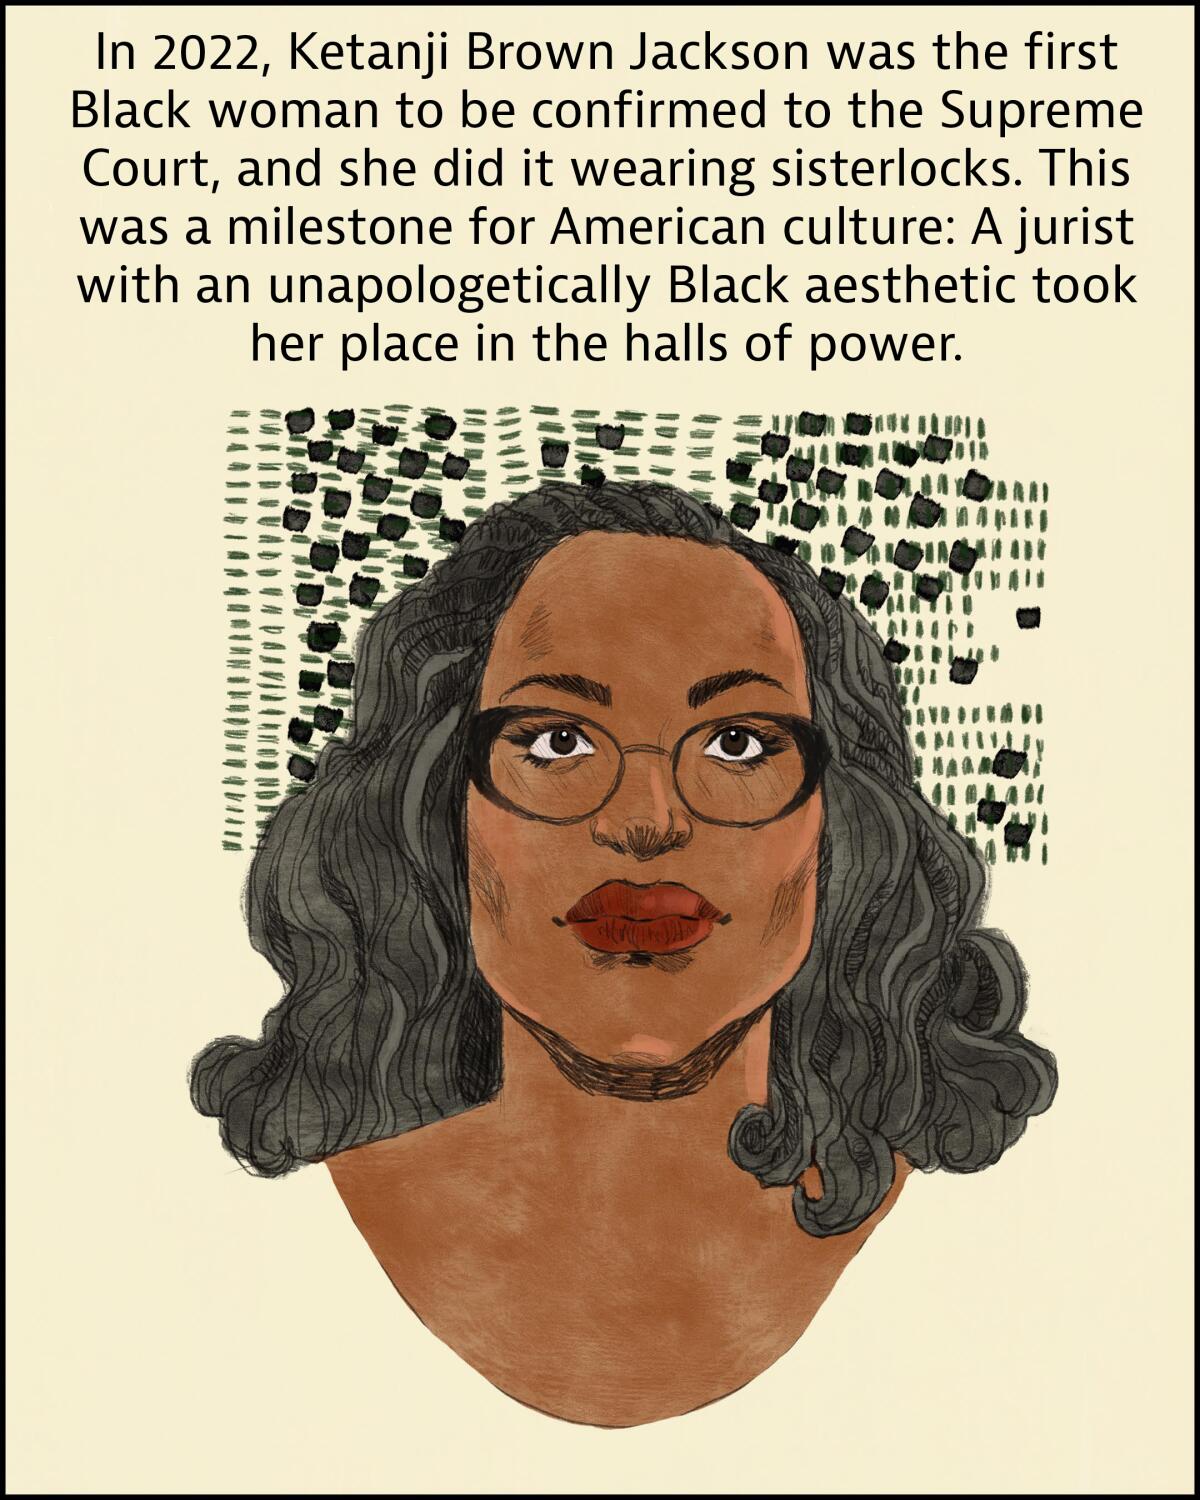 First Black female justice to be confirmed, Ketanji Brown Jackson wore sisterlocks in a milestone for American culture